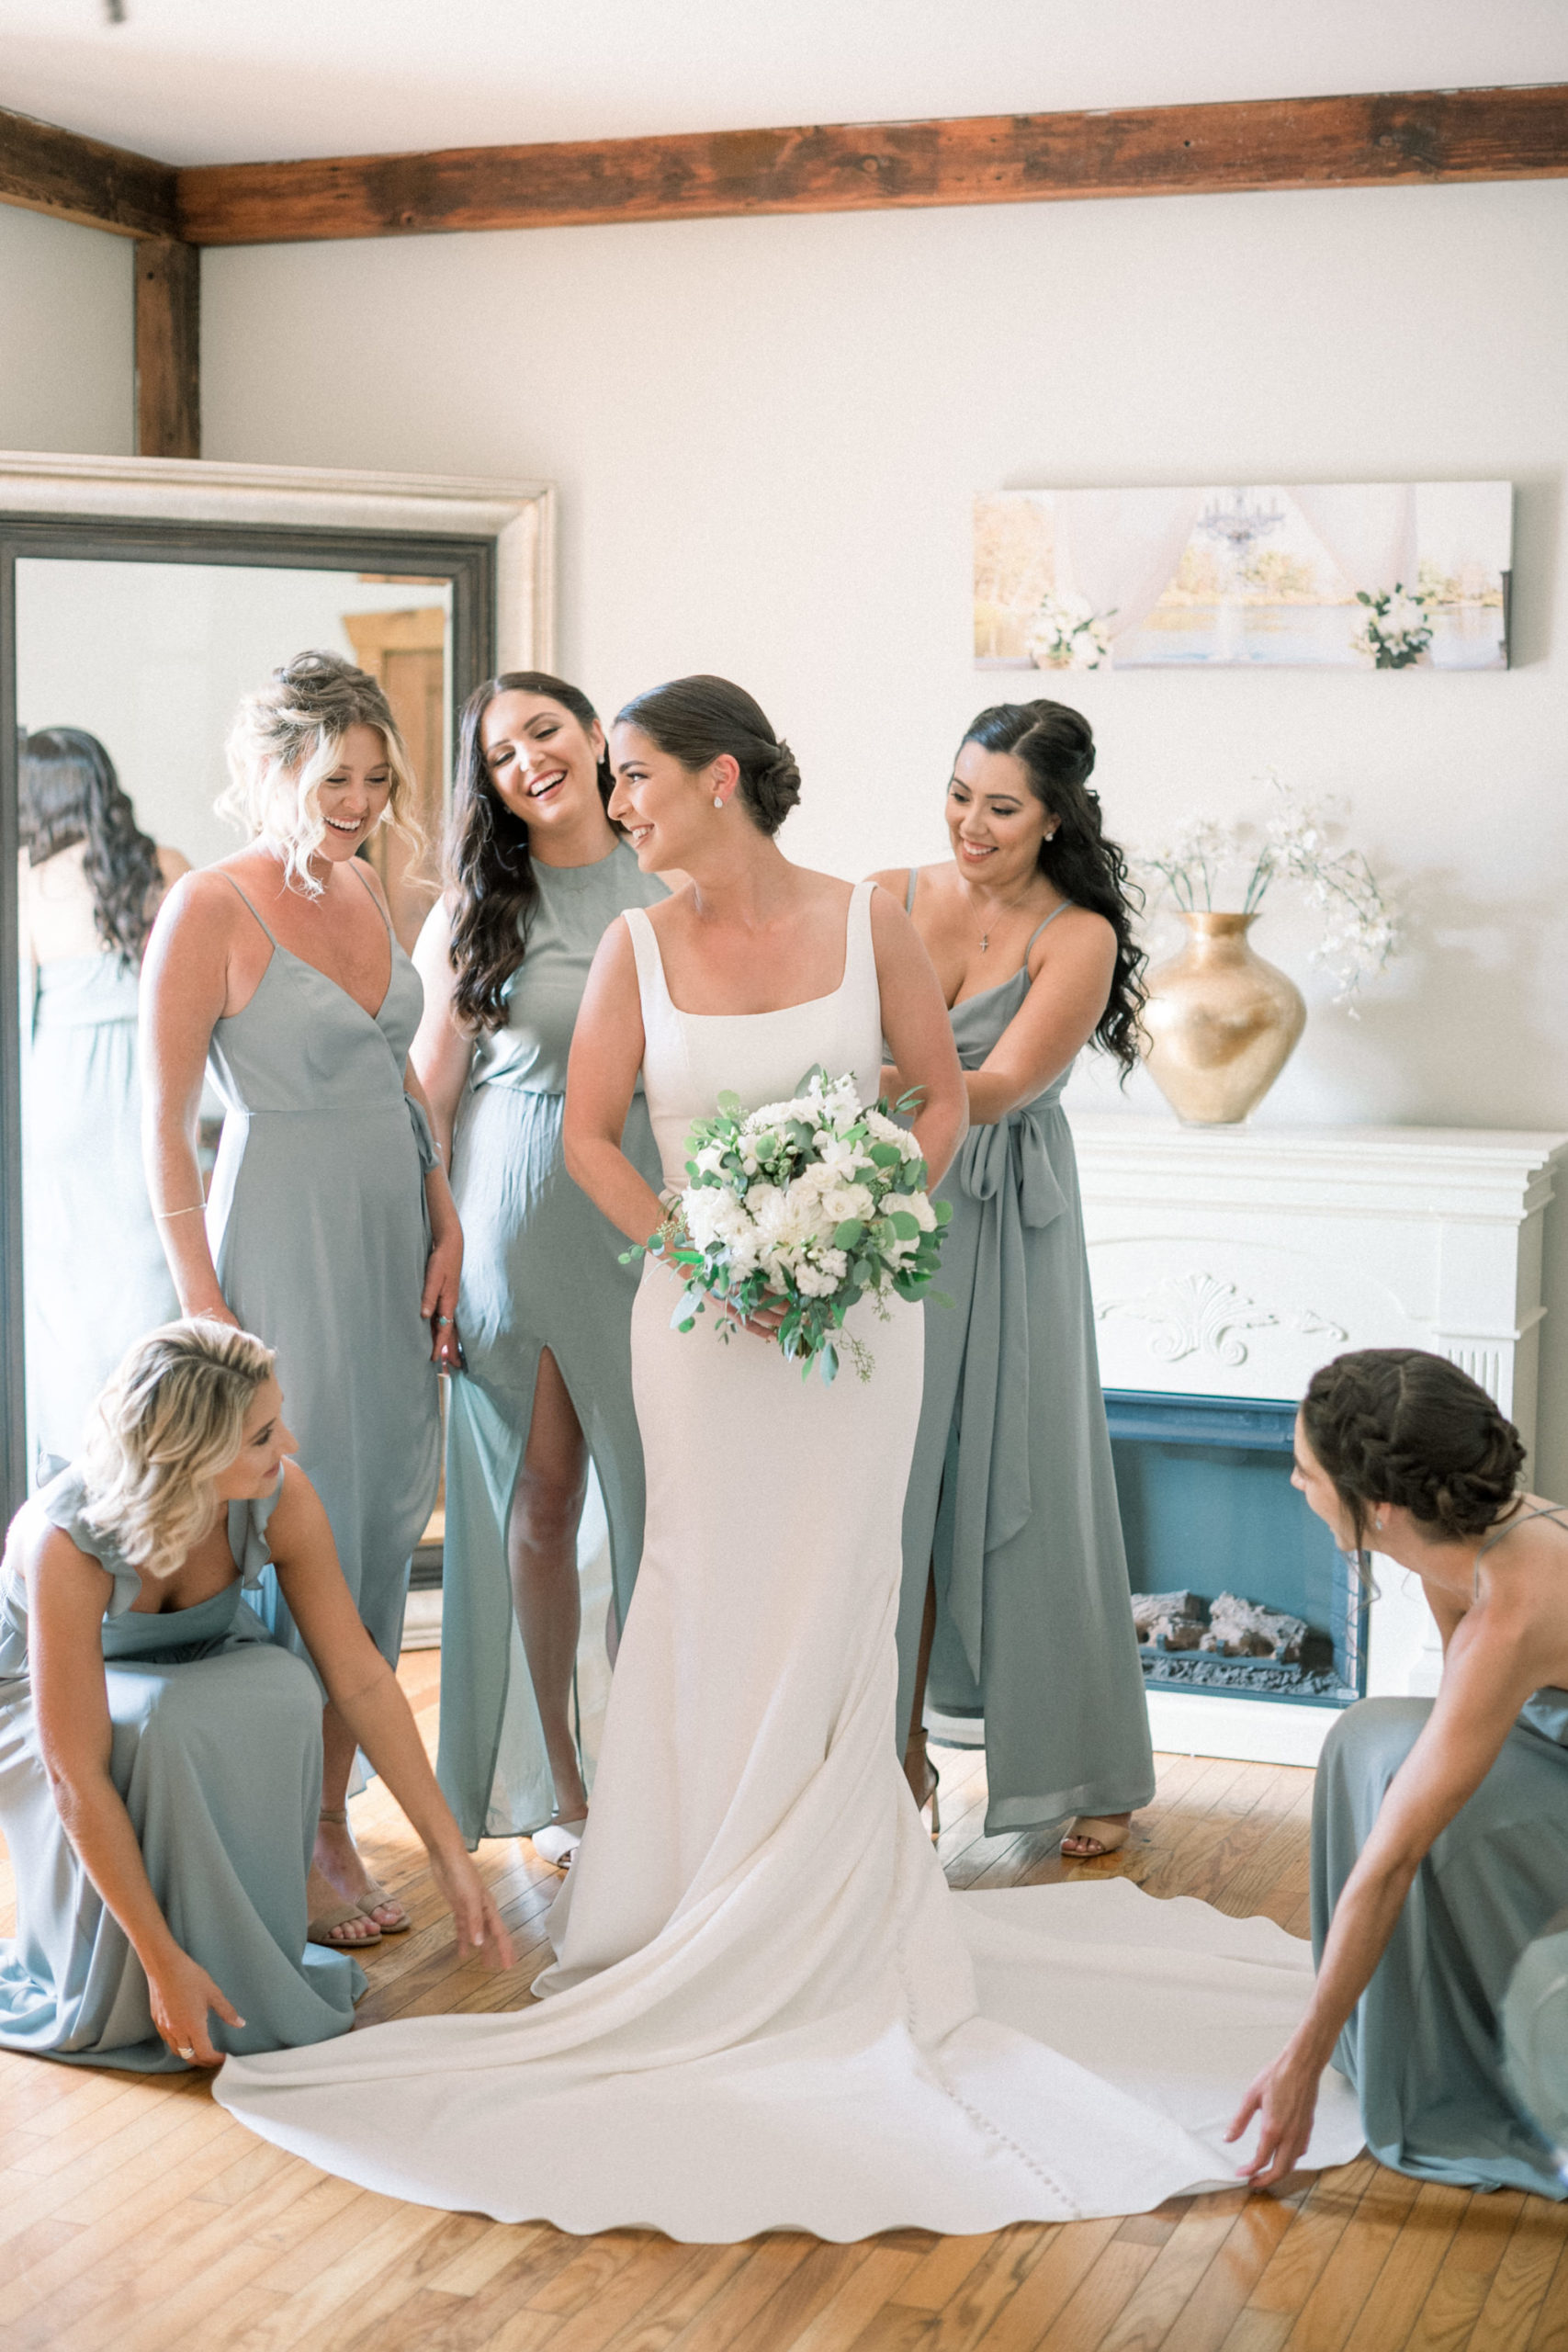 bride getting ready with her best friends and bridesmaids in the bridal suite of her wedding venue